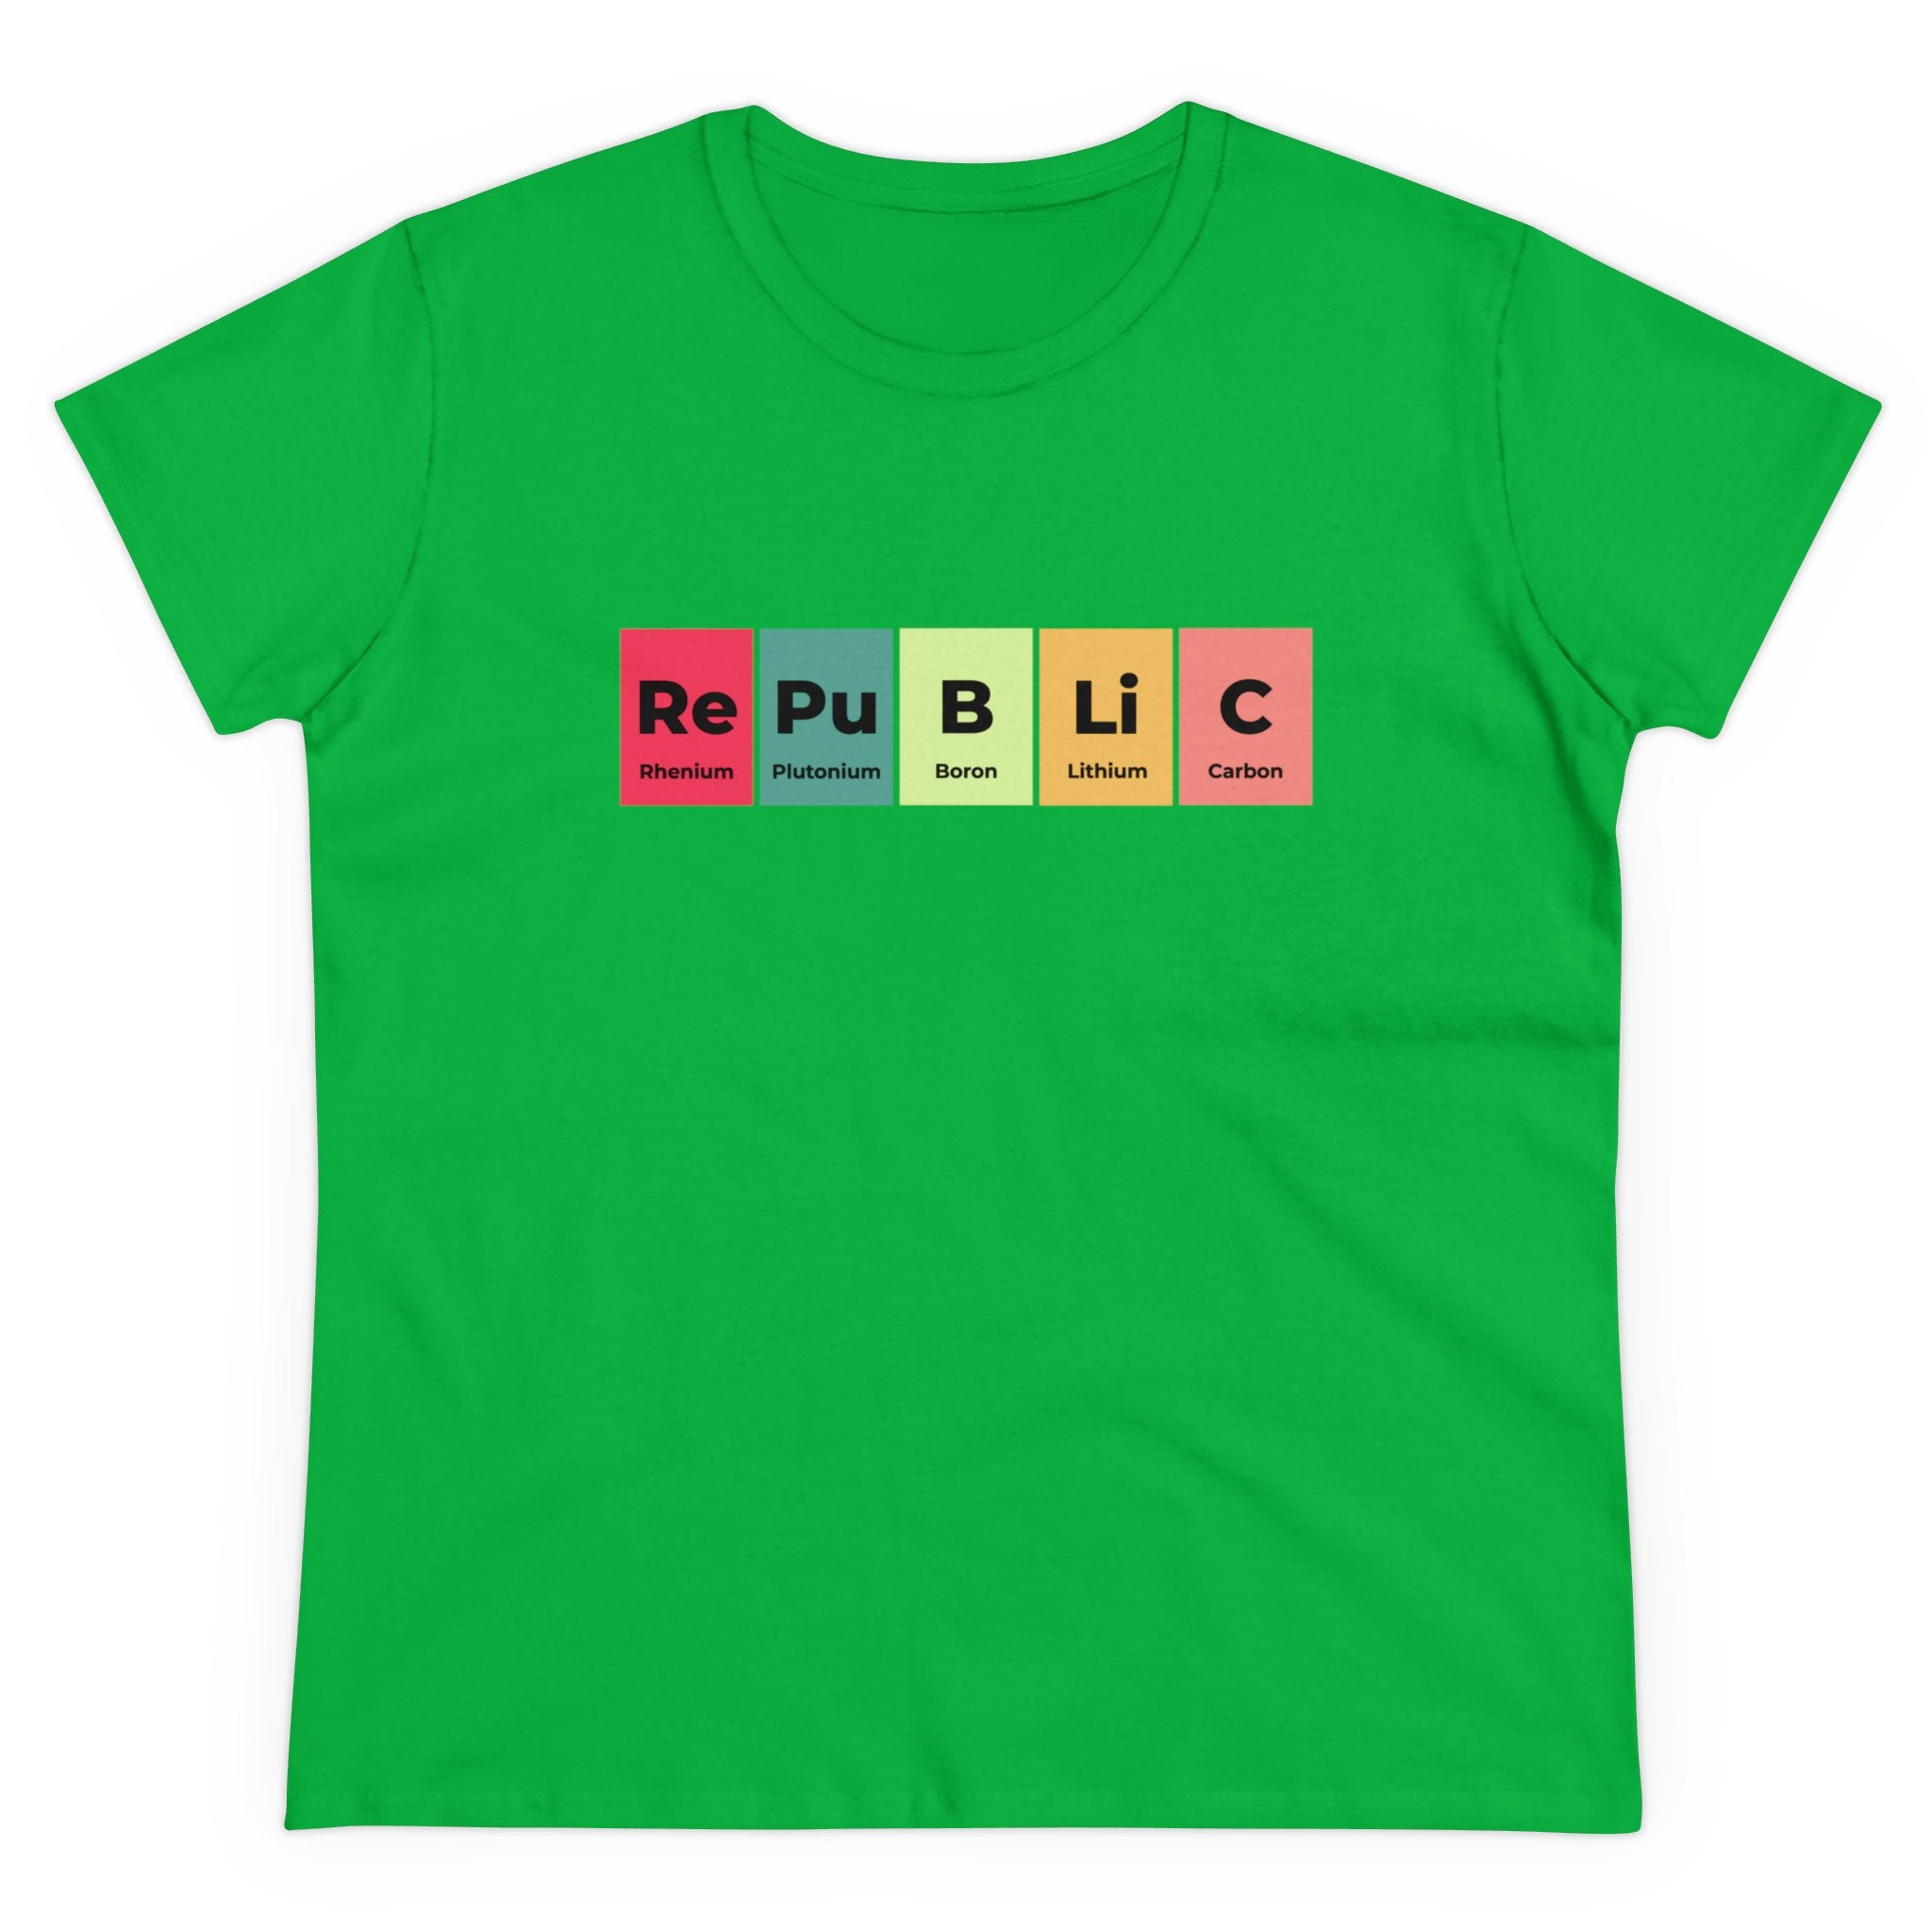 Republic - Women's Tee: Fashionable green women's tee with periodic table letters spelling "RePuBLiC." Element symbols include Rhenium, Plutonium, Boron, Lithium, and Carbon. This comfy shirt combines style and science effortlessly.